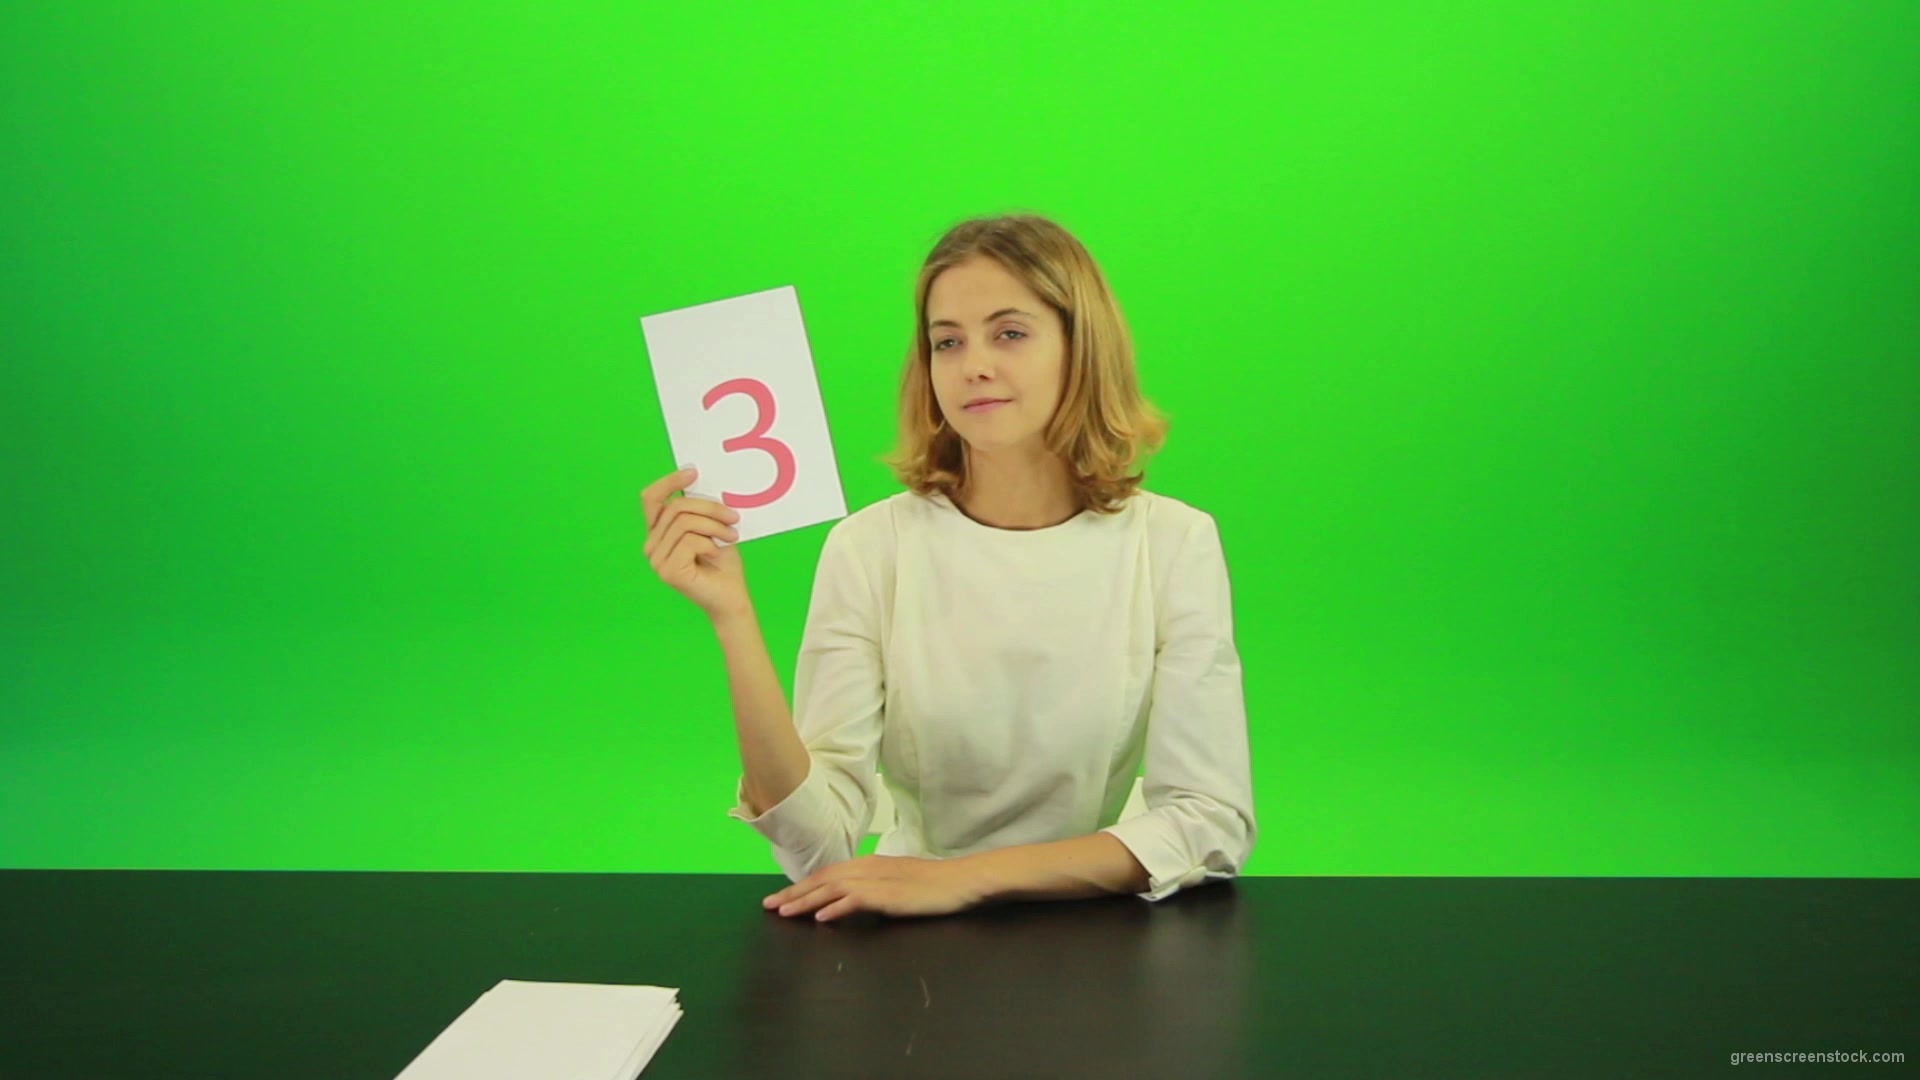 Blonde-hair-girl-in-white-shirt-give-3-point-mark-score-Full-HD-Green-Screen-Video-Footage_006 Green Screen Stock